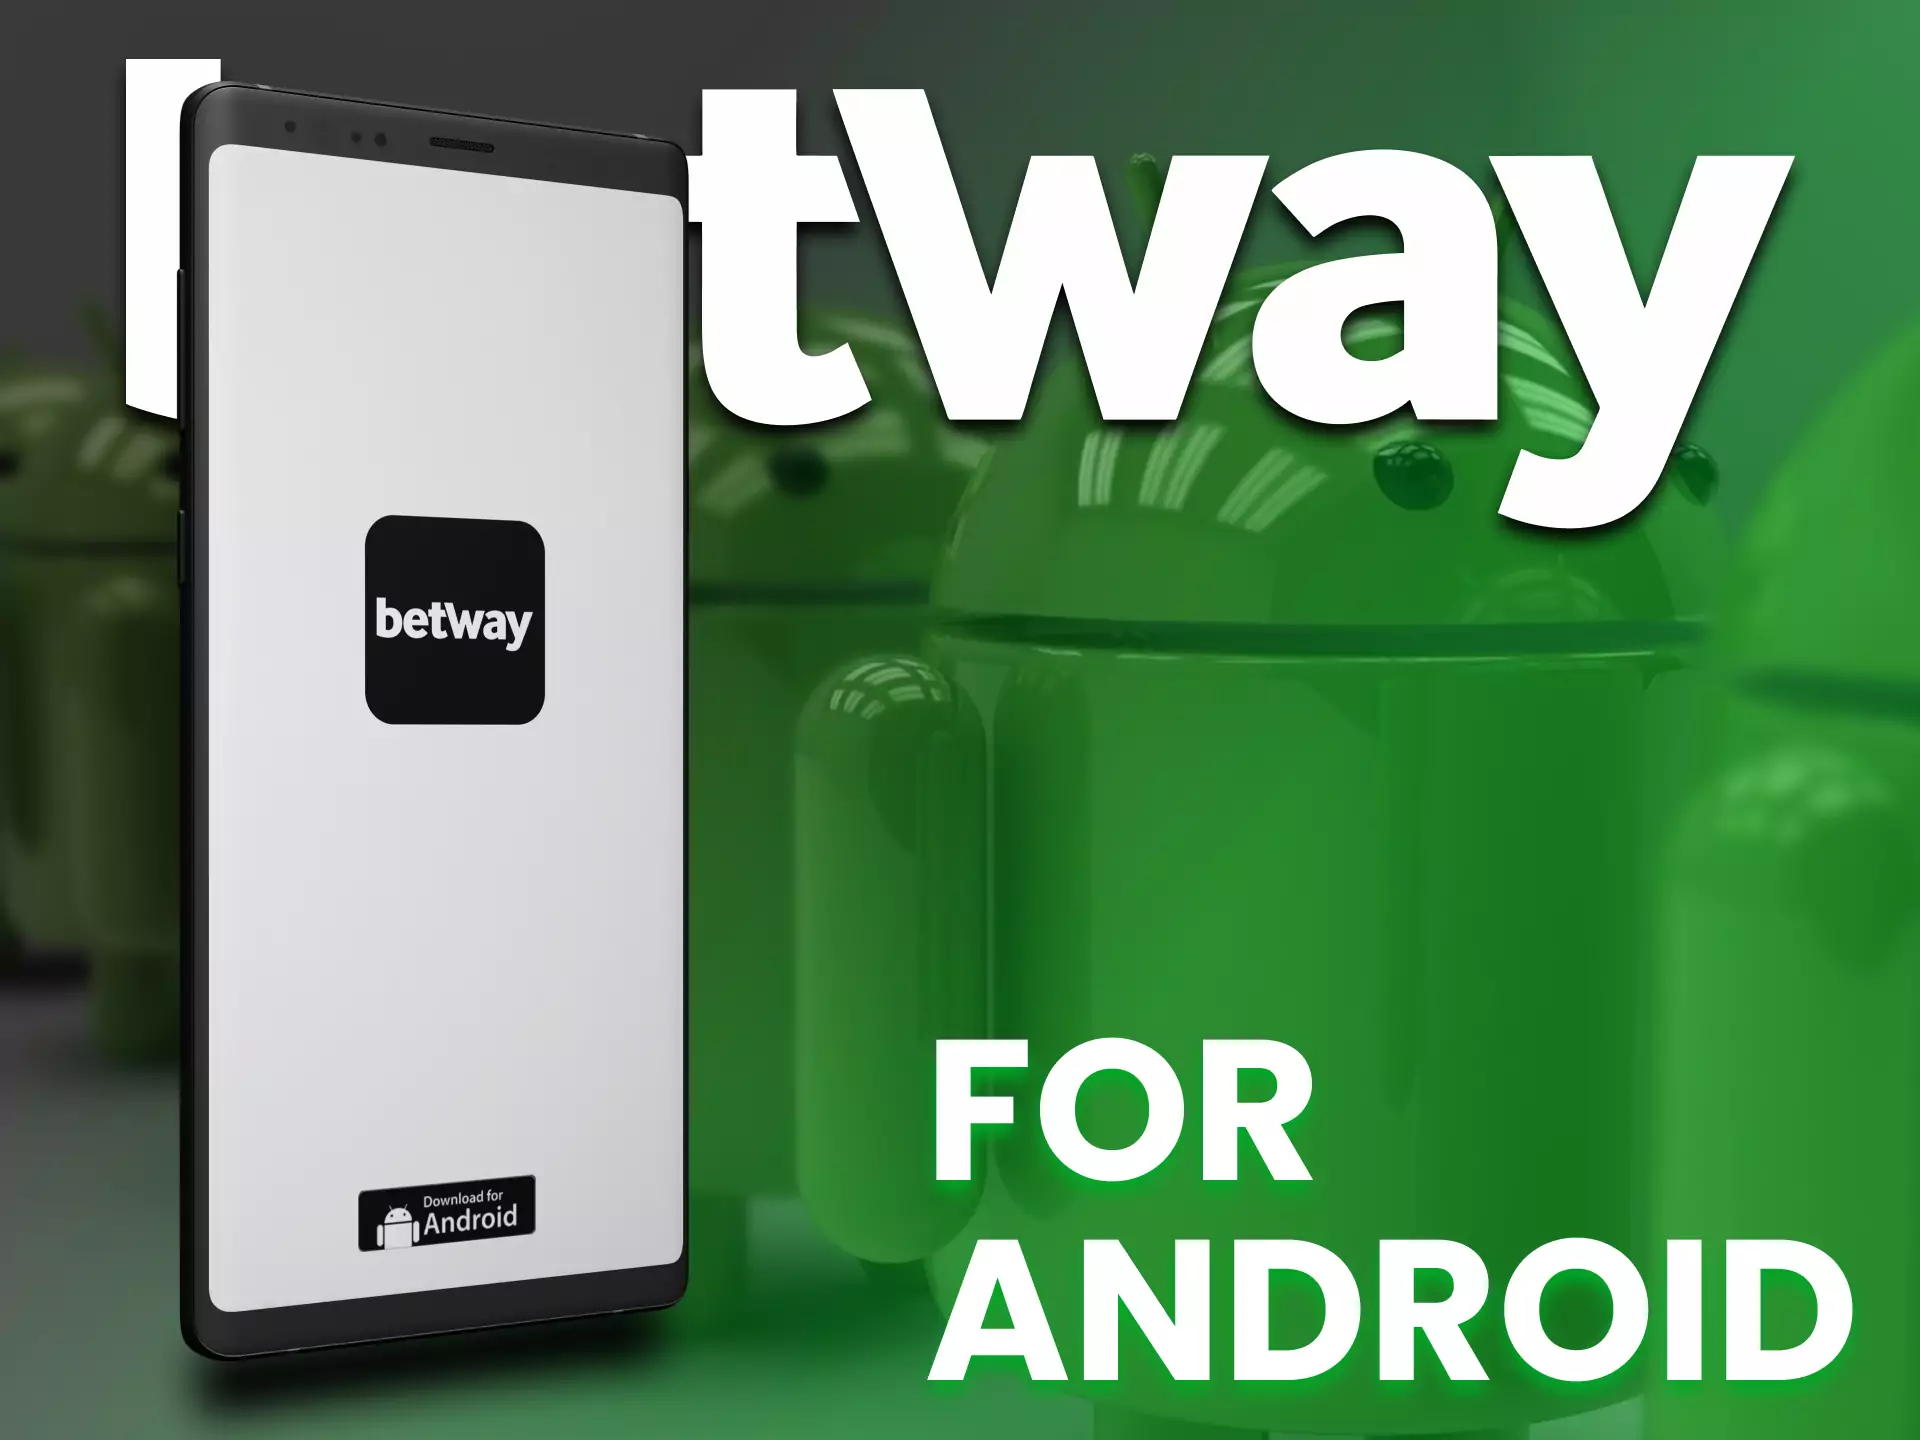 The Betway app can be installed on your Android phone.